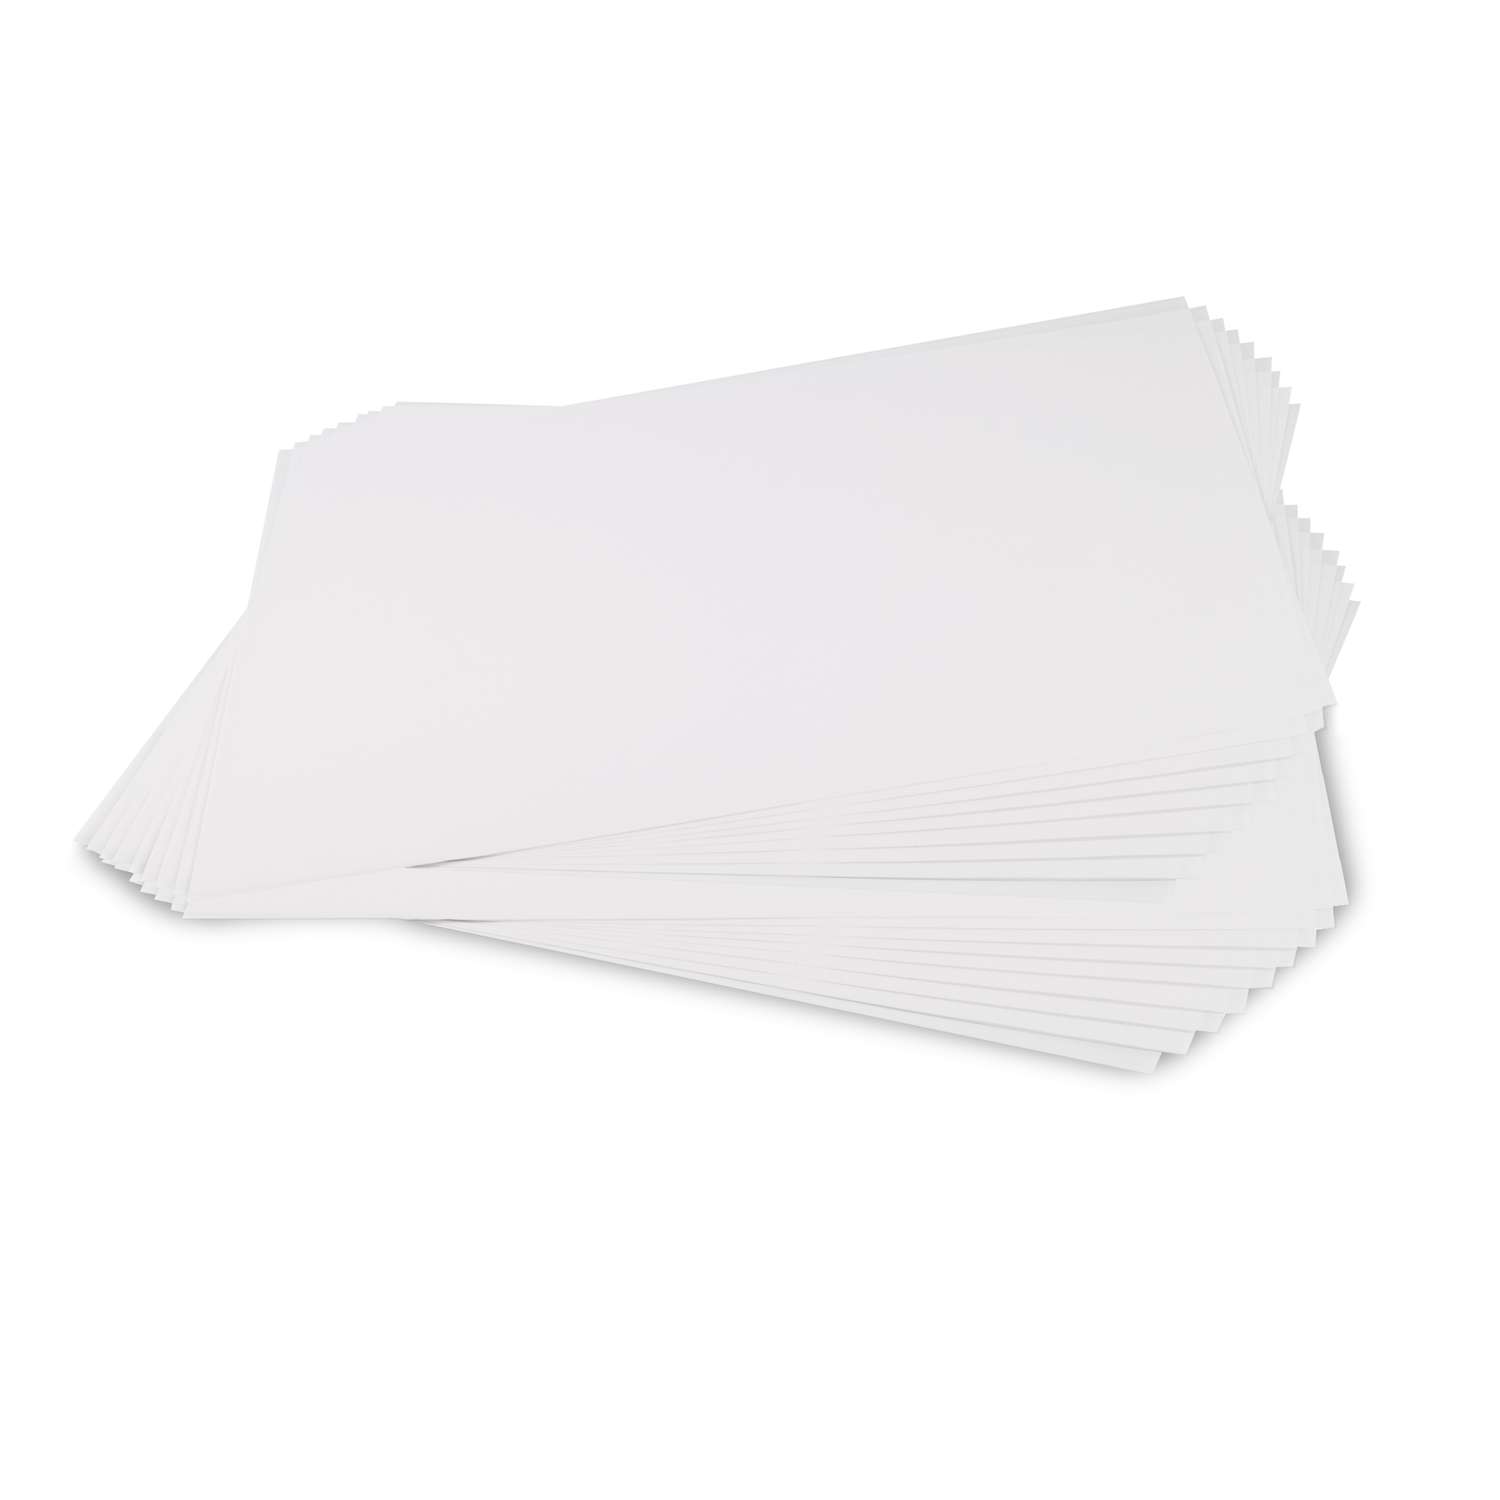 ClearBags 4-Ply 100% Recycled Backing Board